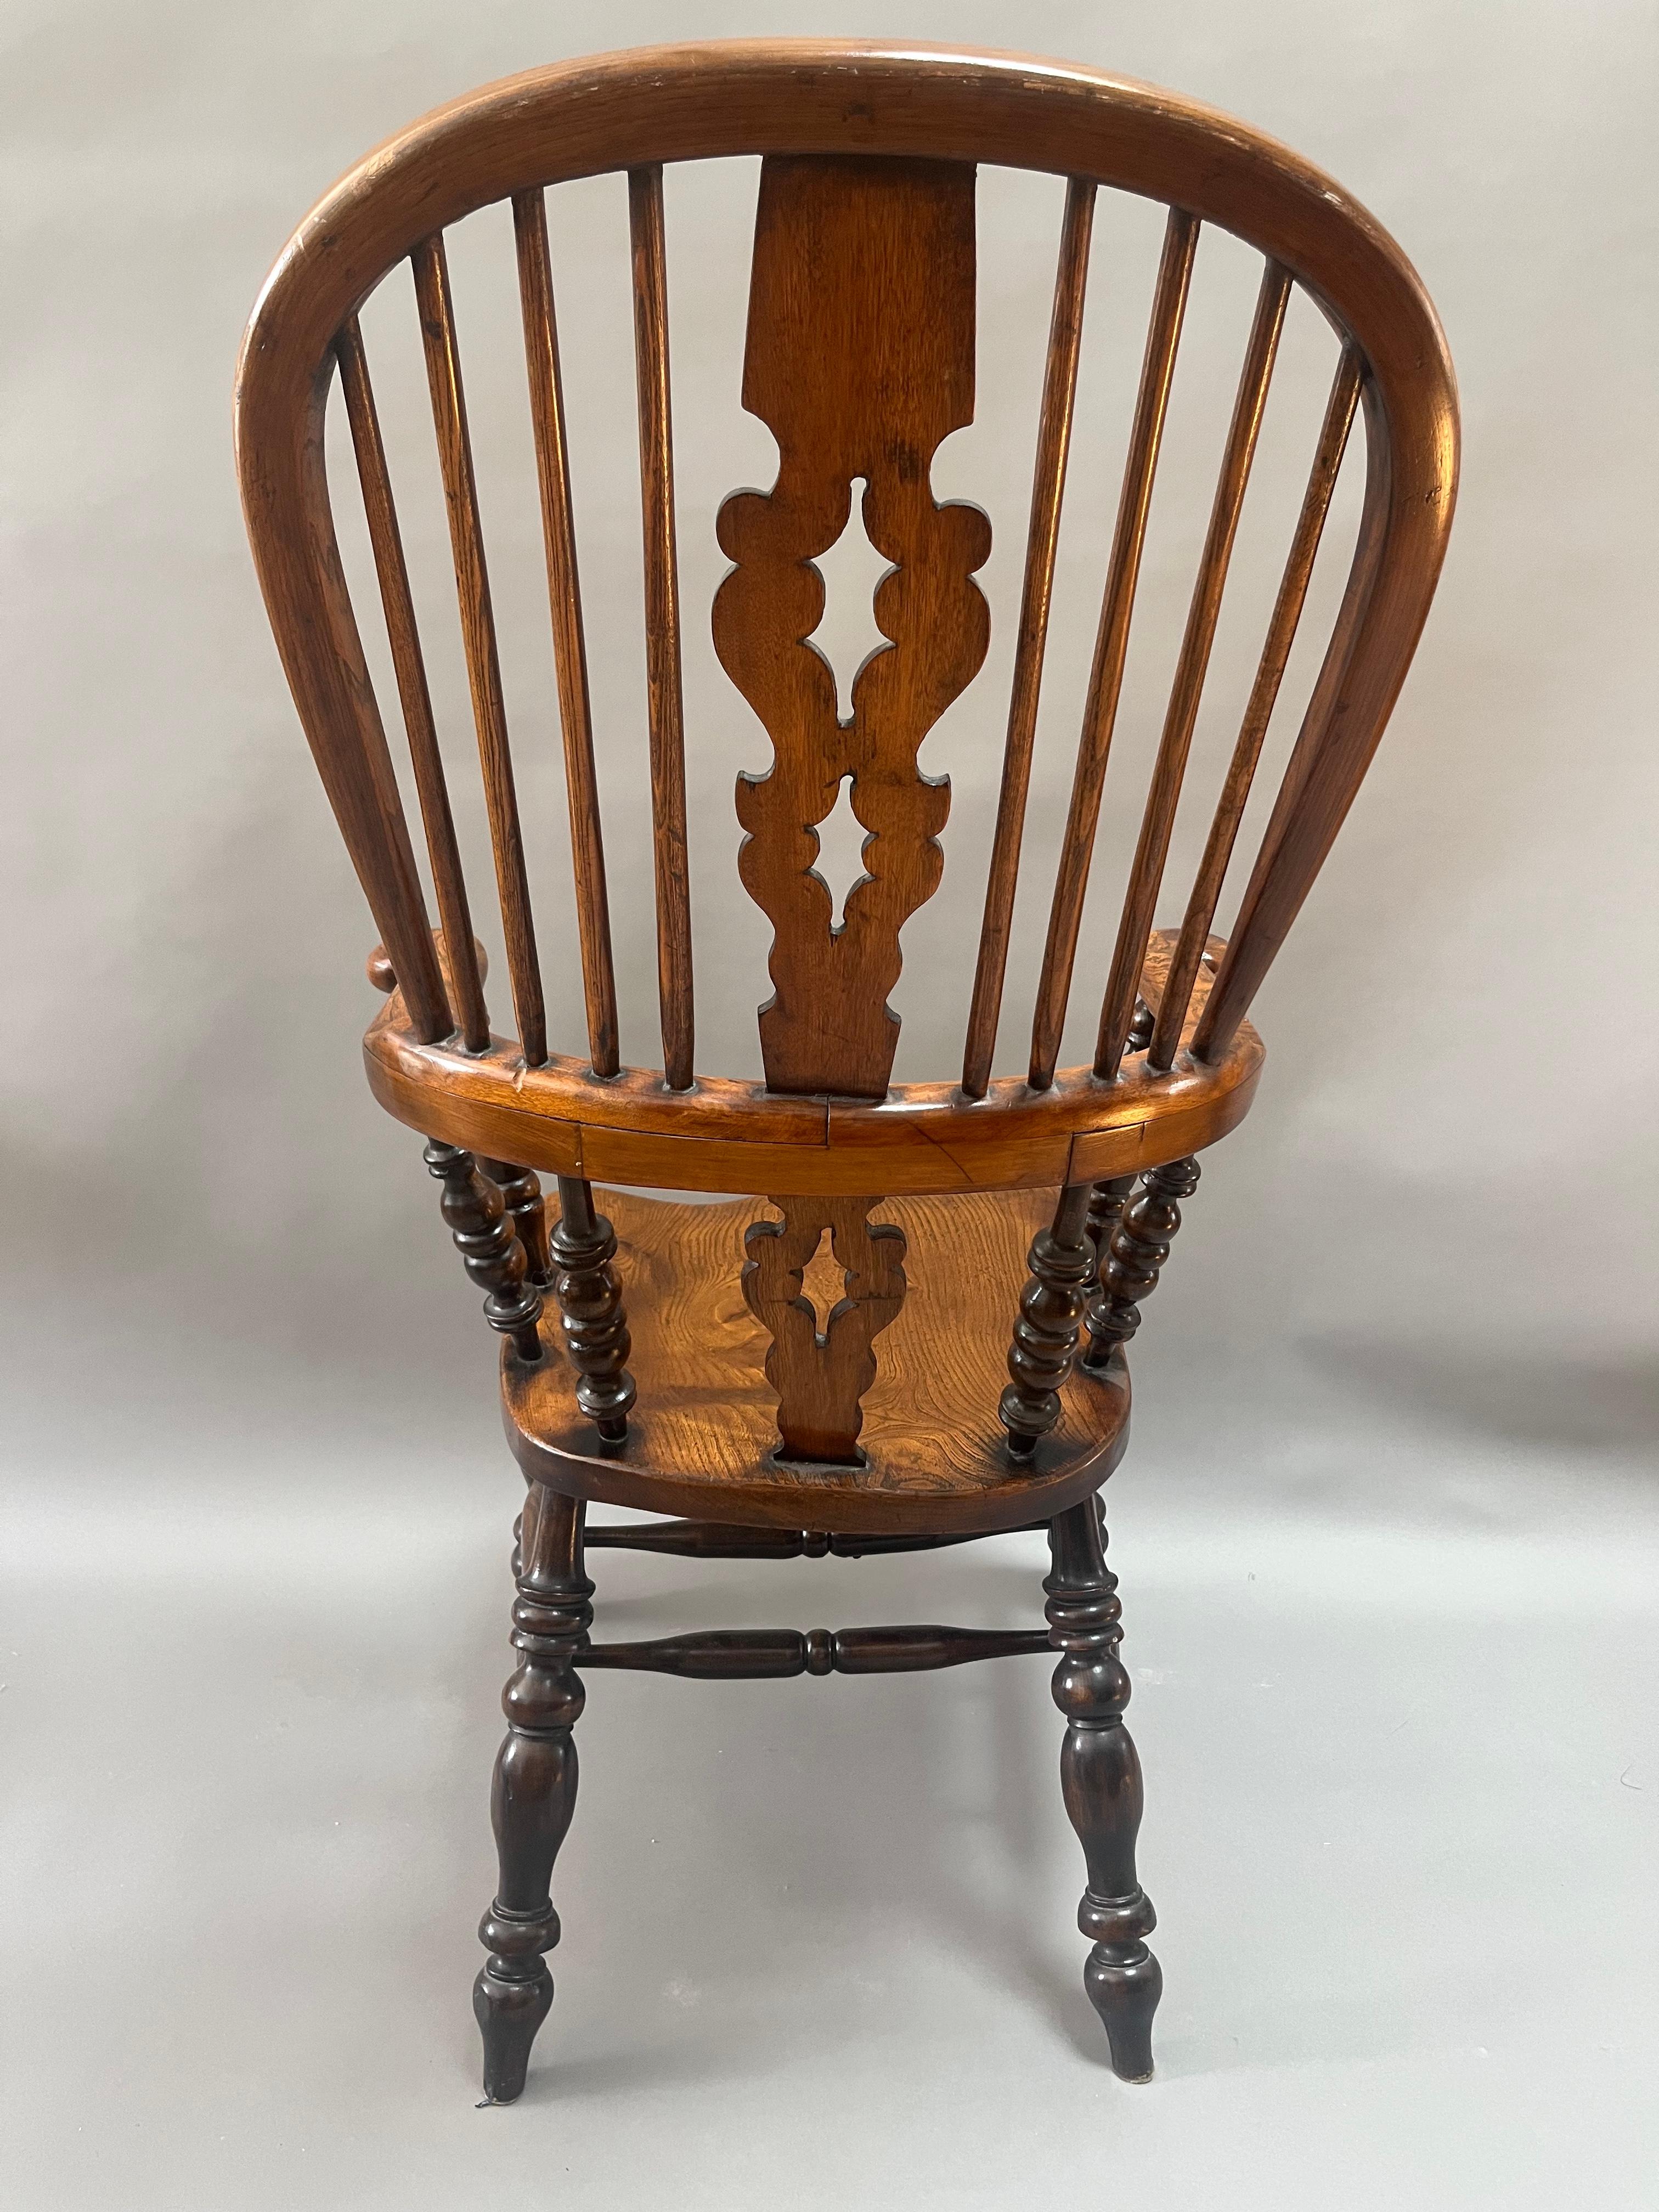 Similar Pair of English George III “Bow Back” Windsor Armchairs.   Fine Quality  Elegant proportions and extremely comfortable. Made of various woods.  All with a rich patination and deep lustrous color. Shaped pierced splat with burled grain over